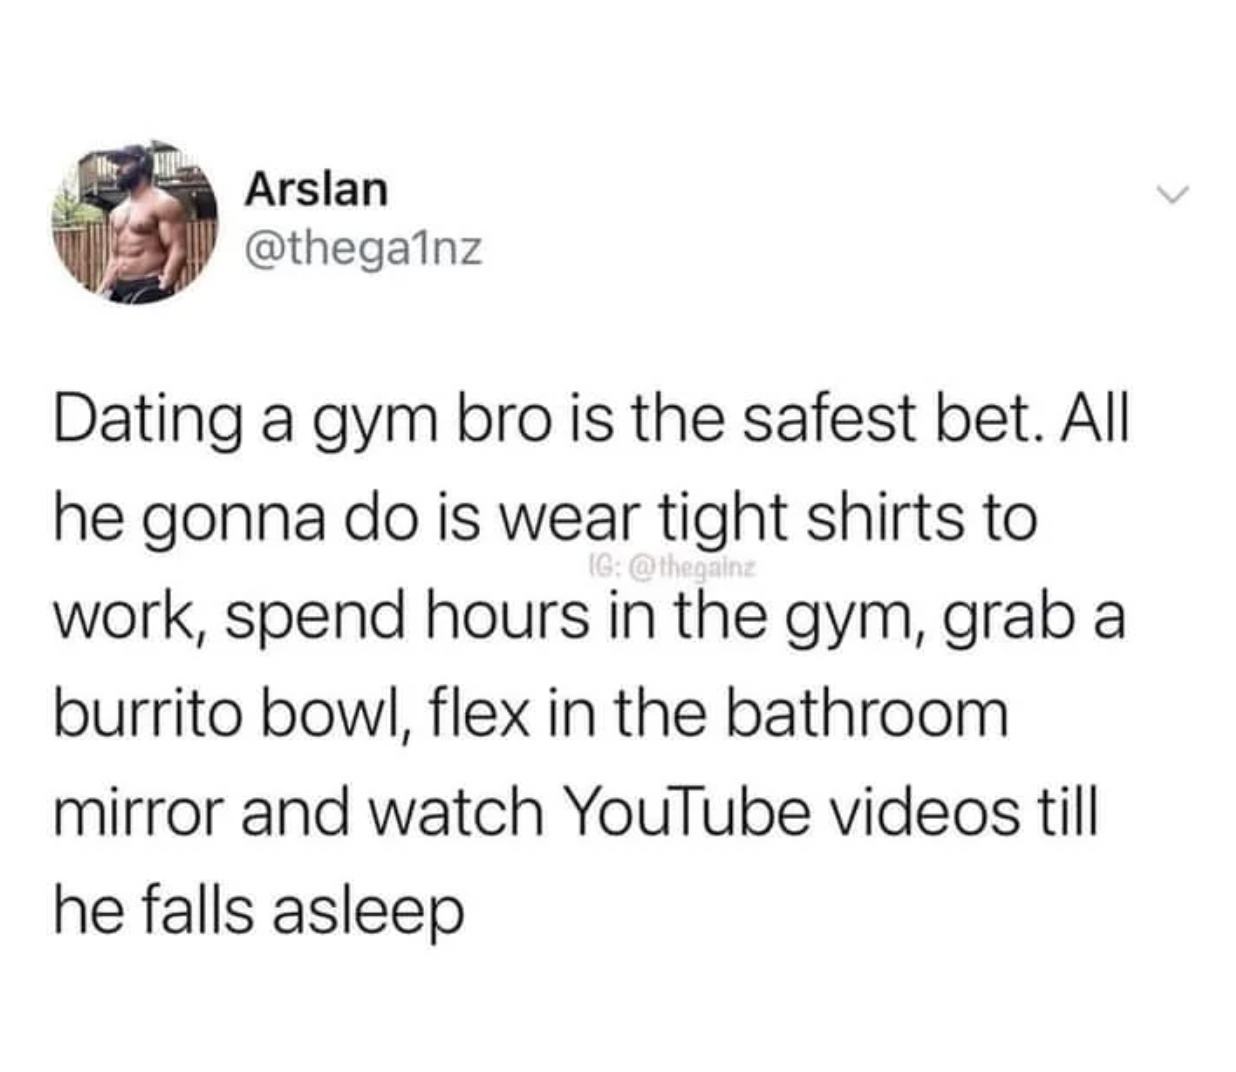 vegas ain t ready meme - Arslan Dating a gym bro is the safest bet. All Ig he gonna do is wear tight shirts to work, spend hours in the gym, grab a burrito bowl, flex in the bathroom mirror and watch YouTube videos till he falls asleep